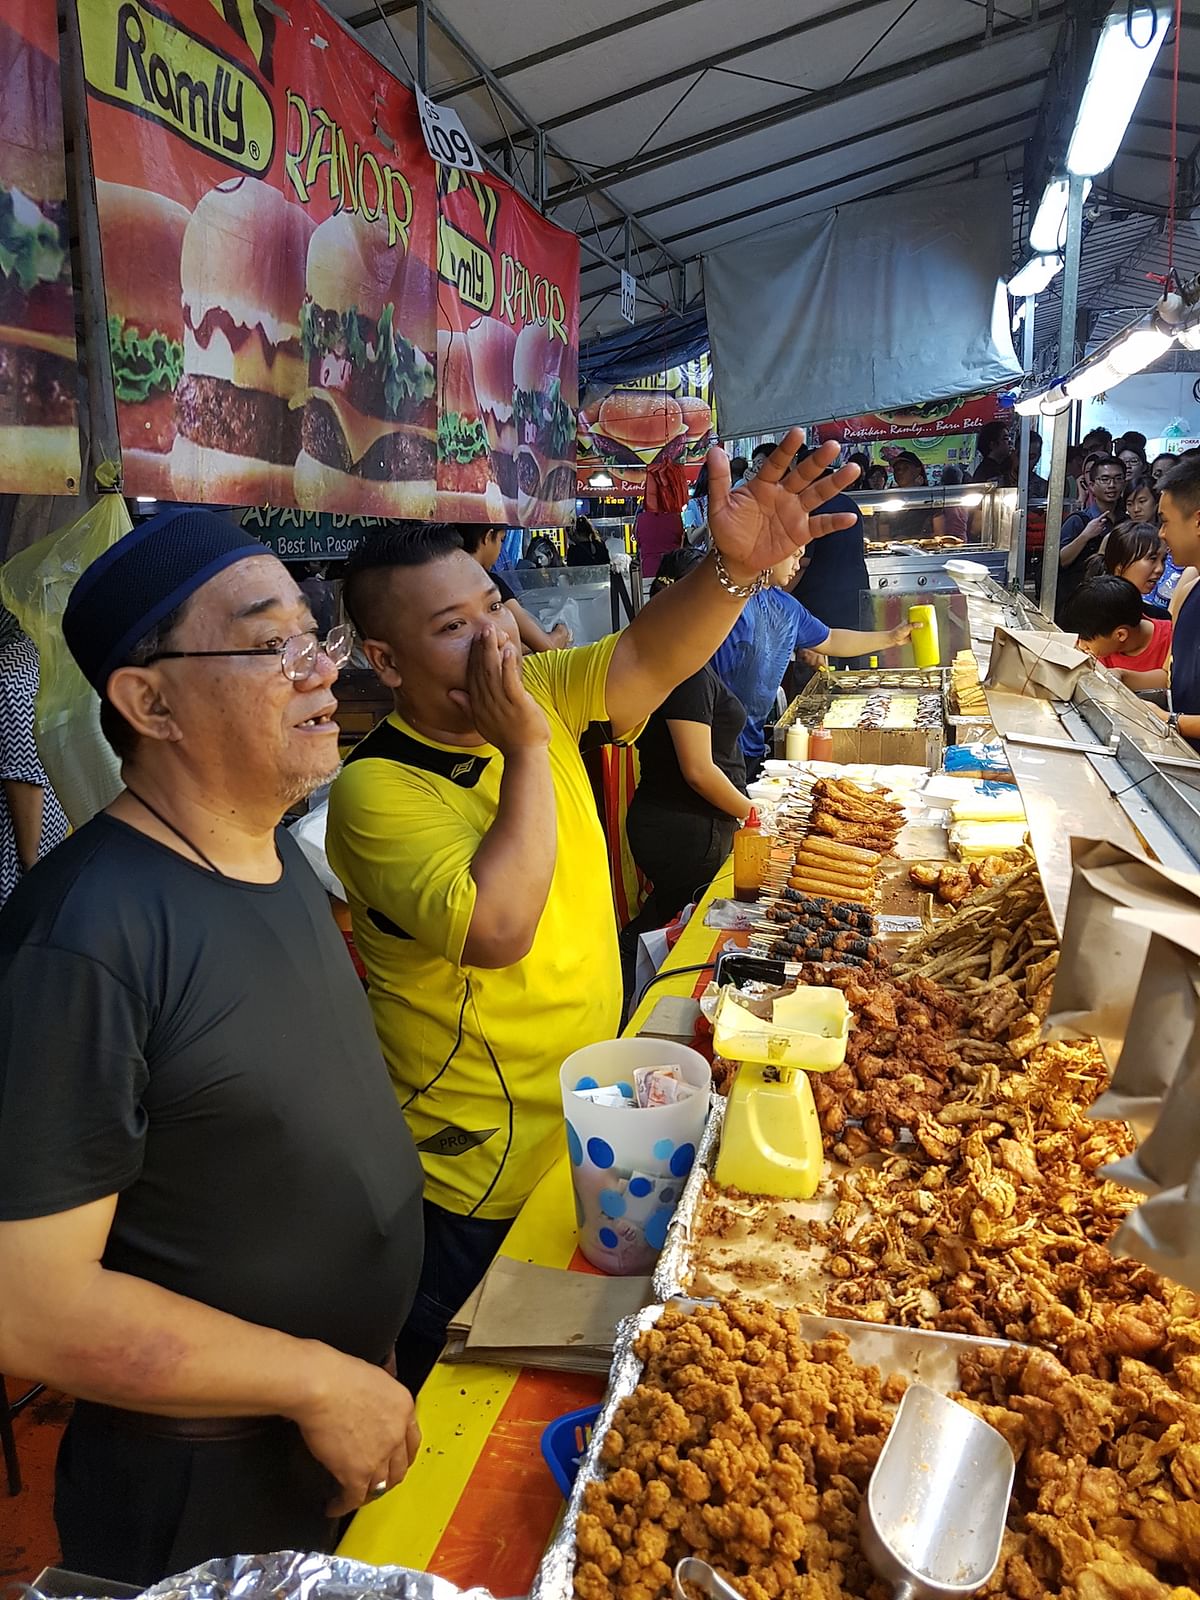 How I spent the eve of Eid in the scrumptious food market of Singapore – a city that is a melting pot of cultures.